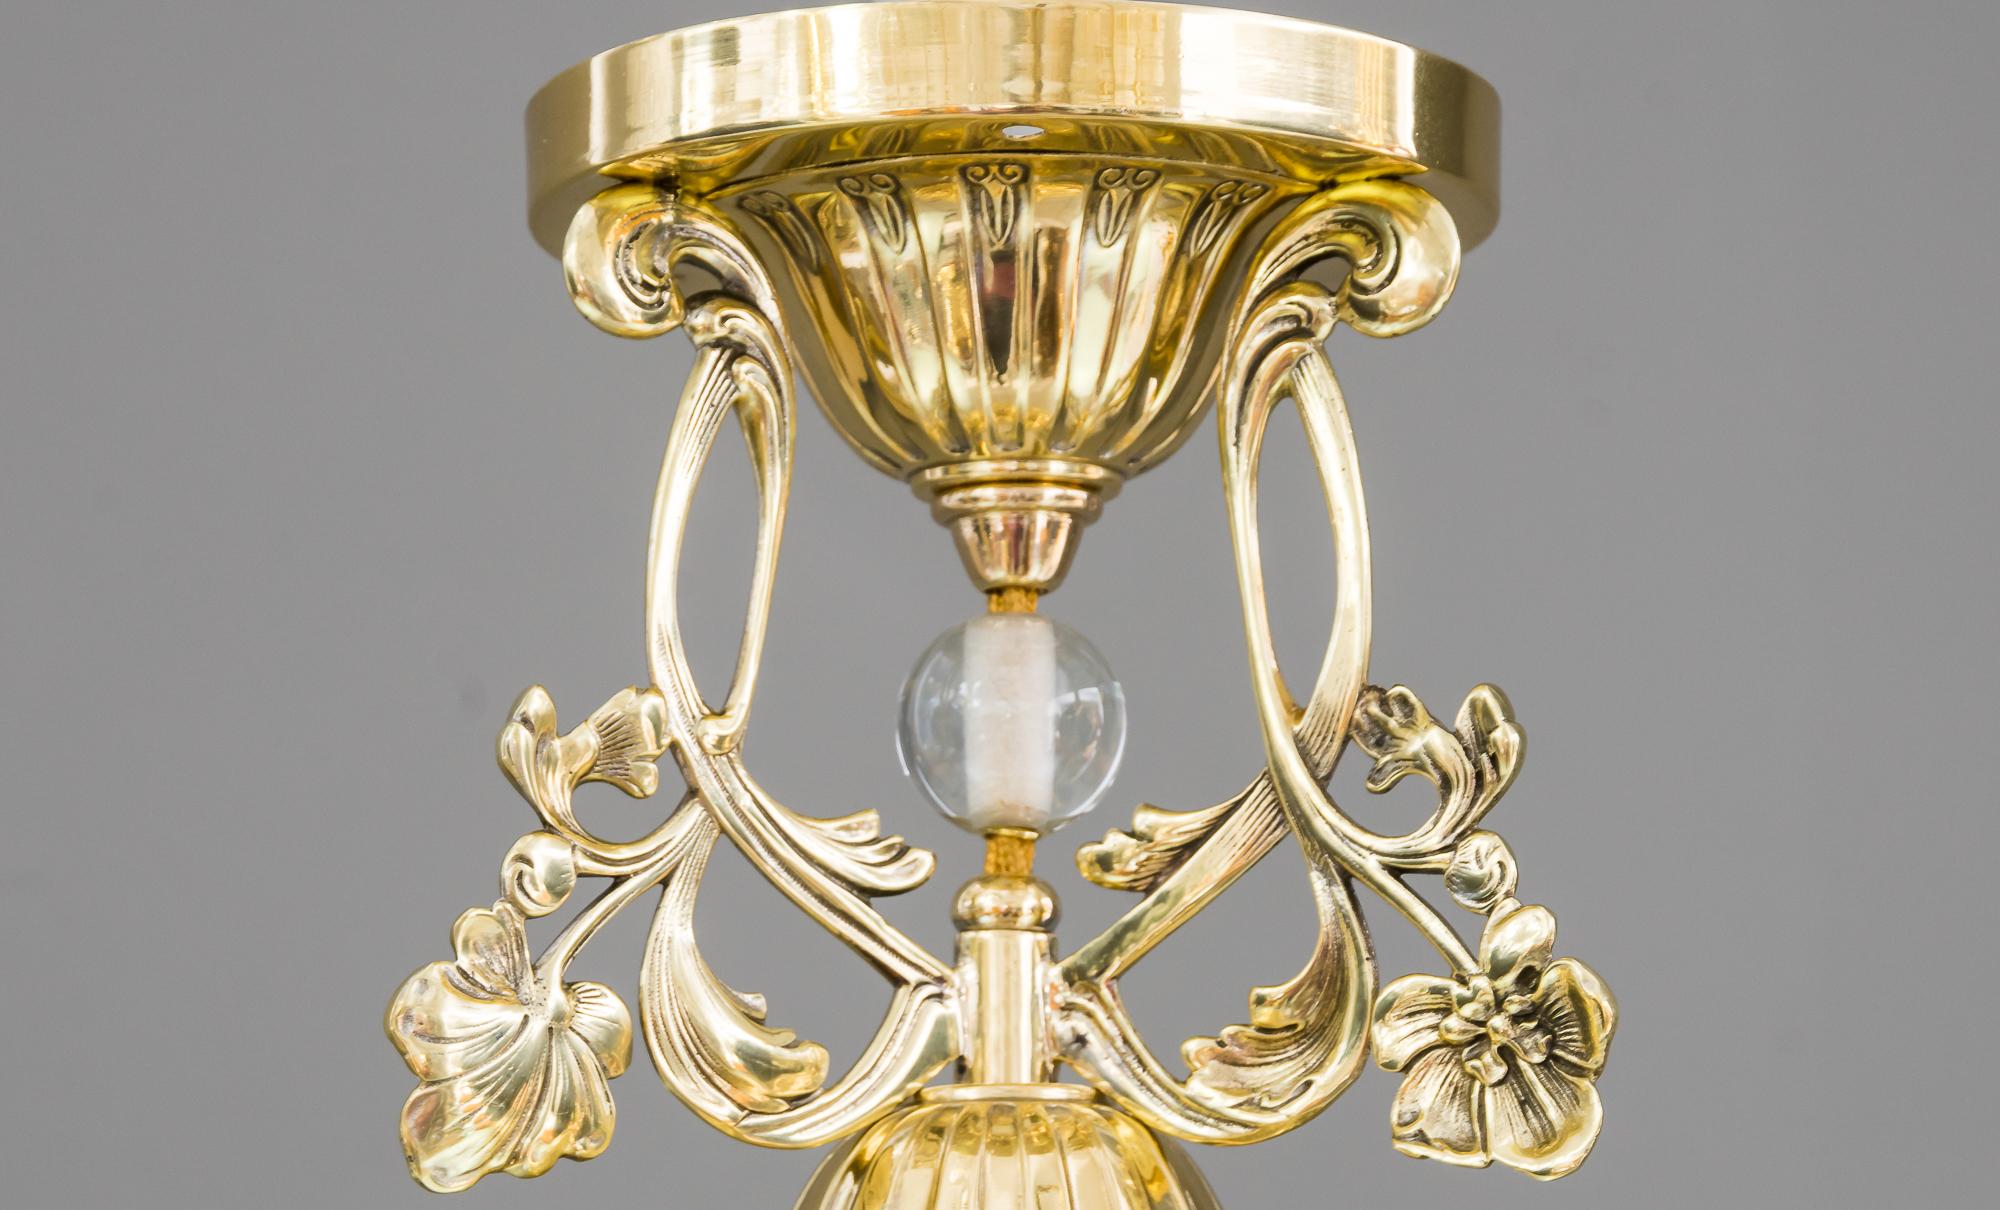 Early 20th Century Jugendstil Ceiling Lamp with Beautiful Shade, circa 1903